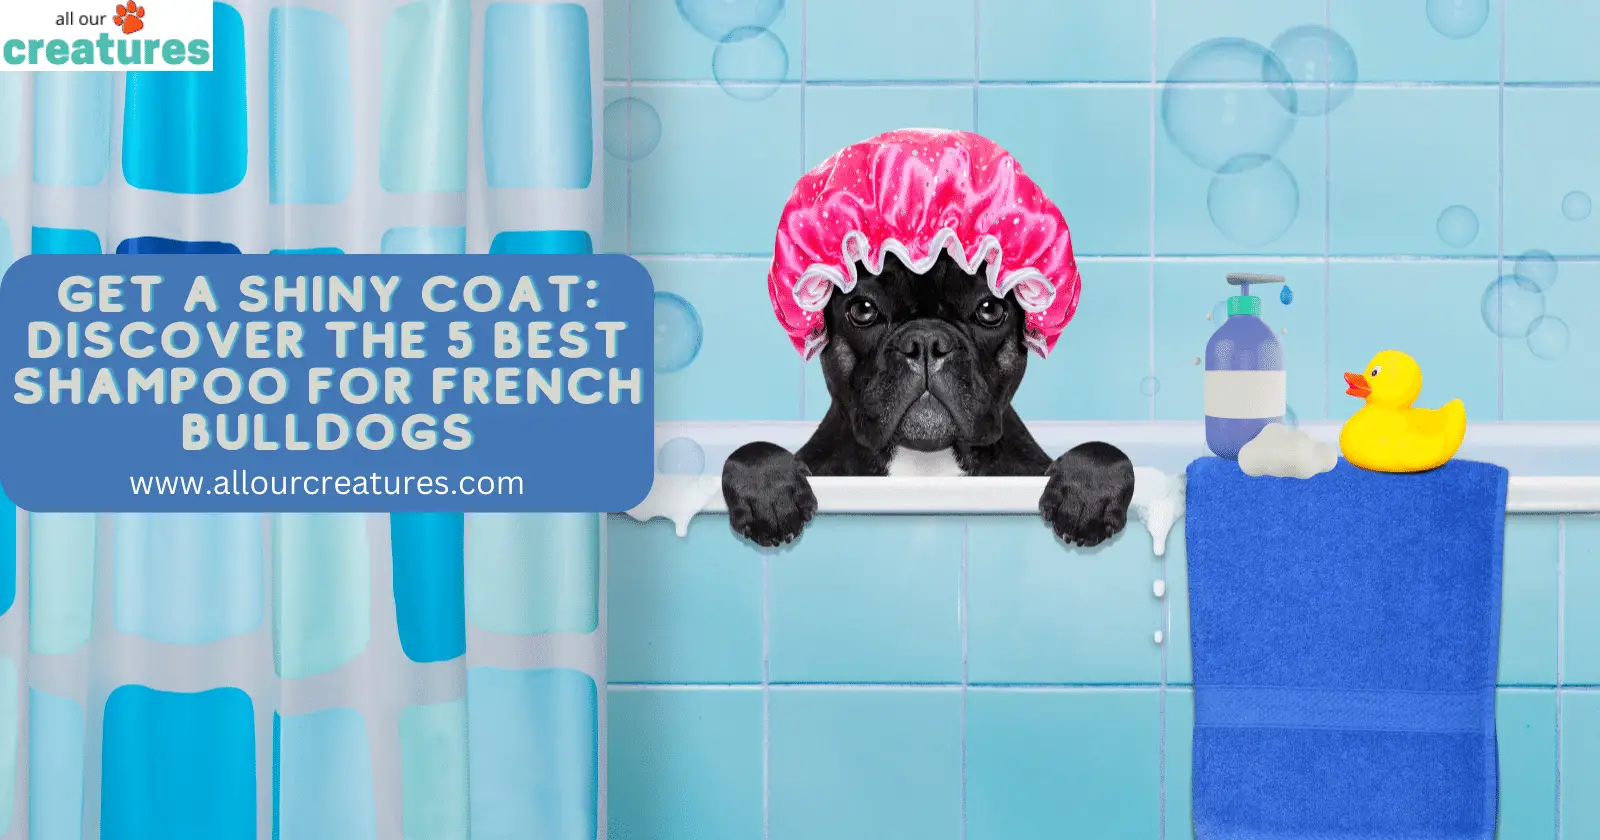 Get a Shiny Coat! Discover the 5 Best Shampoo for French Bulldogs